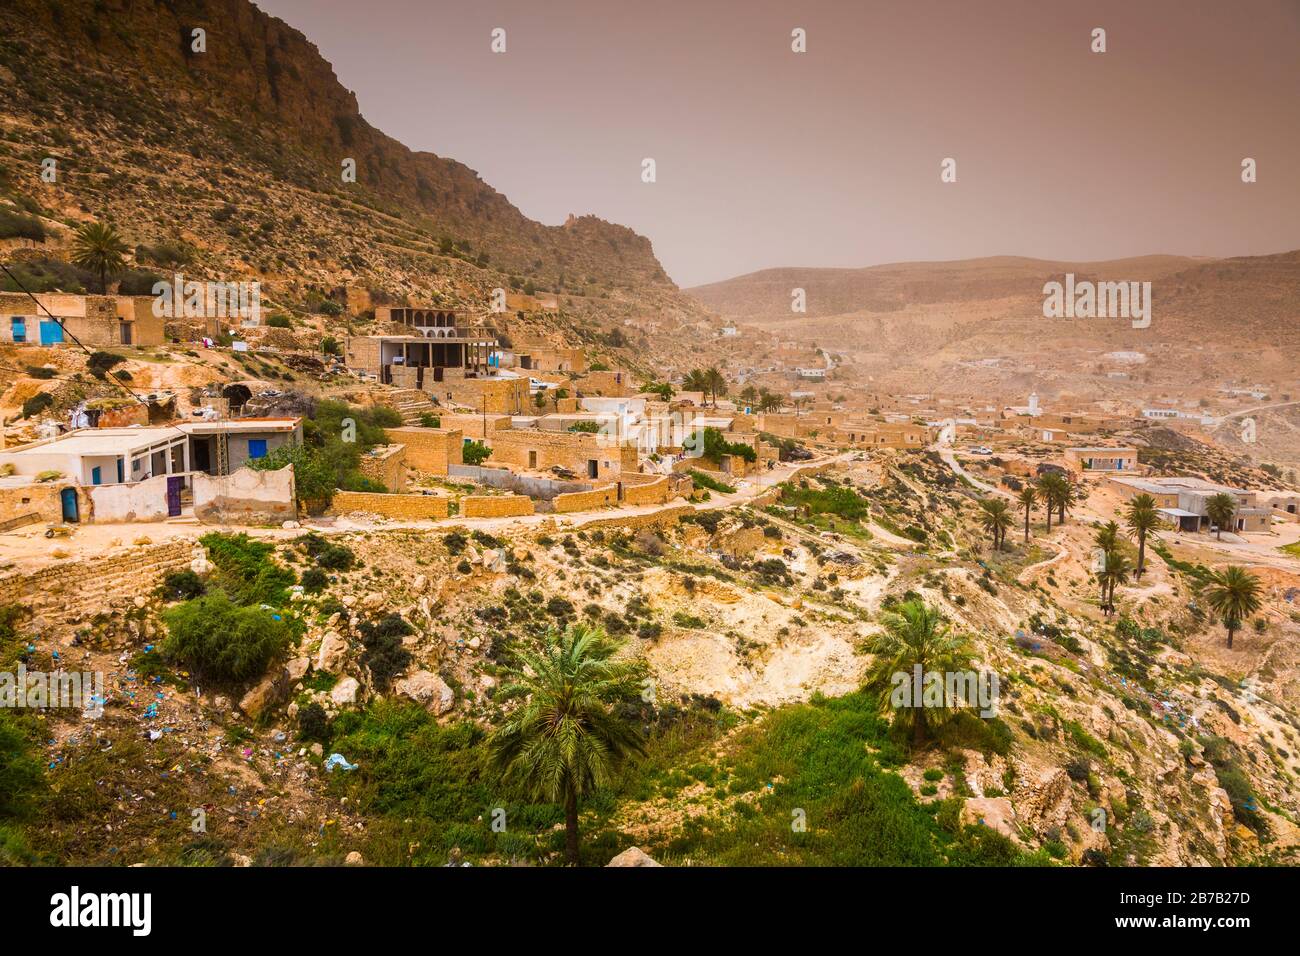 Village in a deserted land. Stock Photo